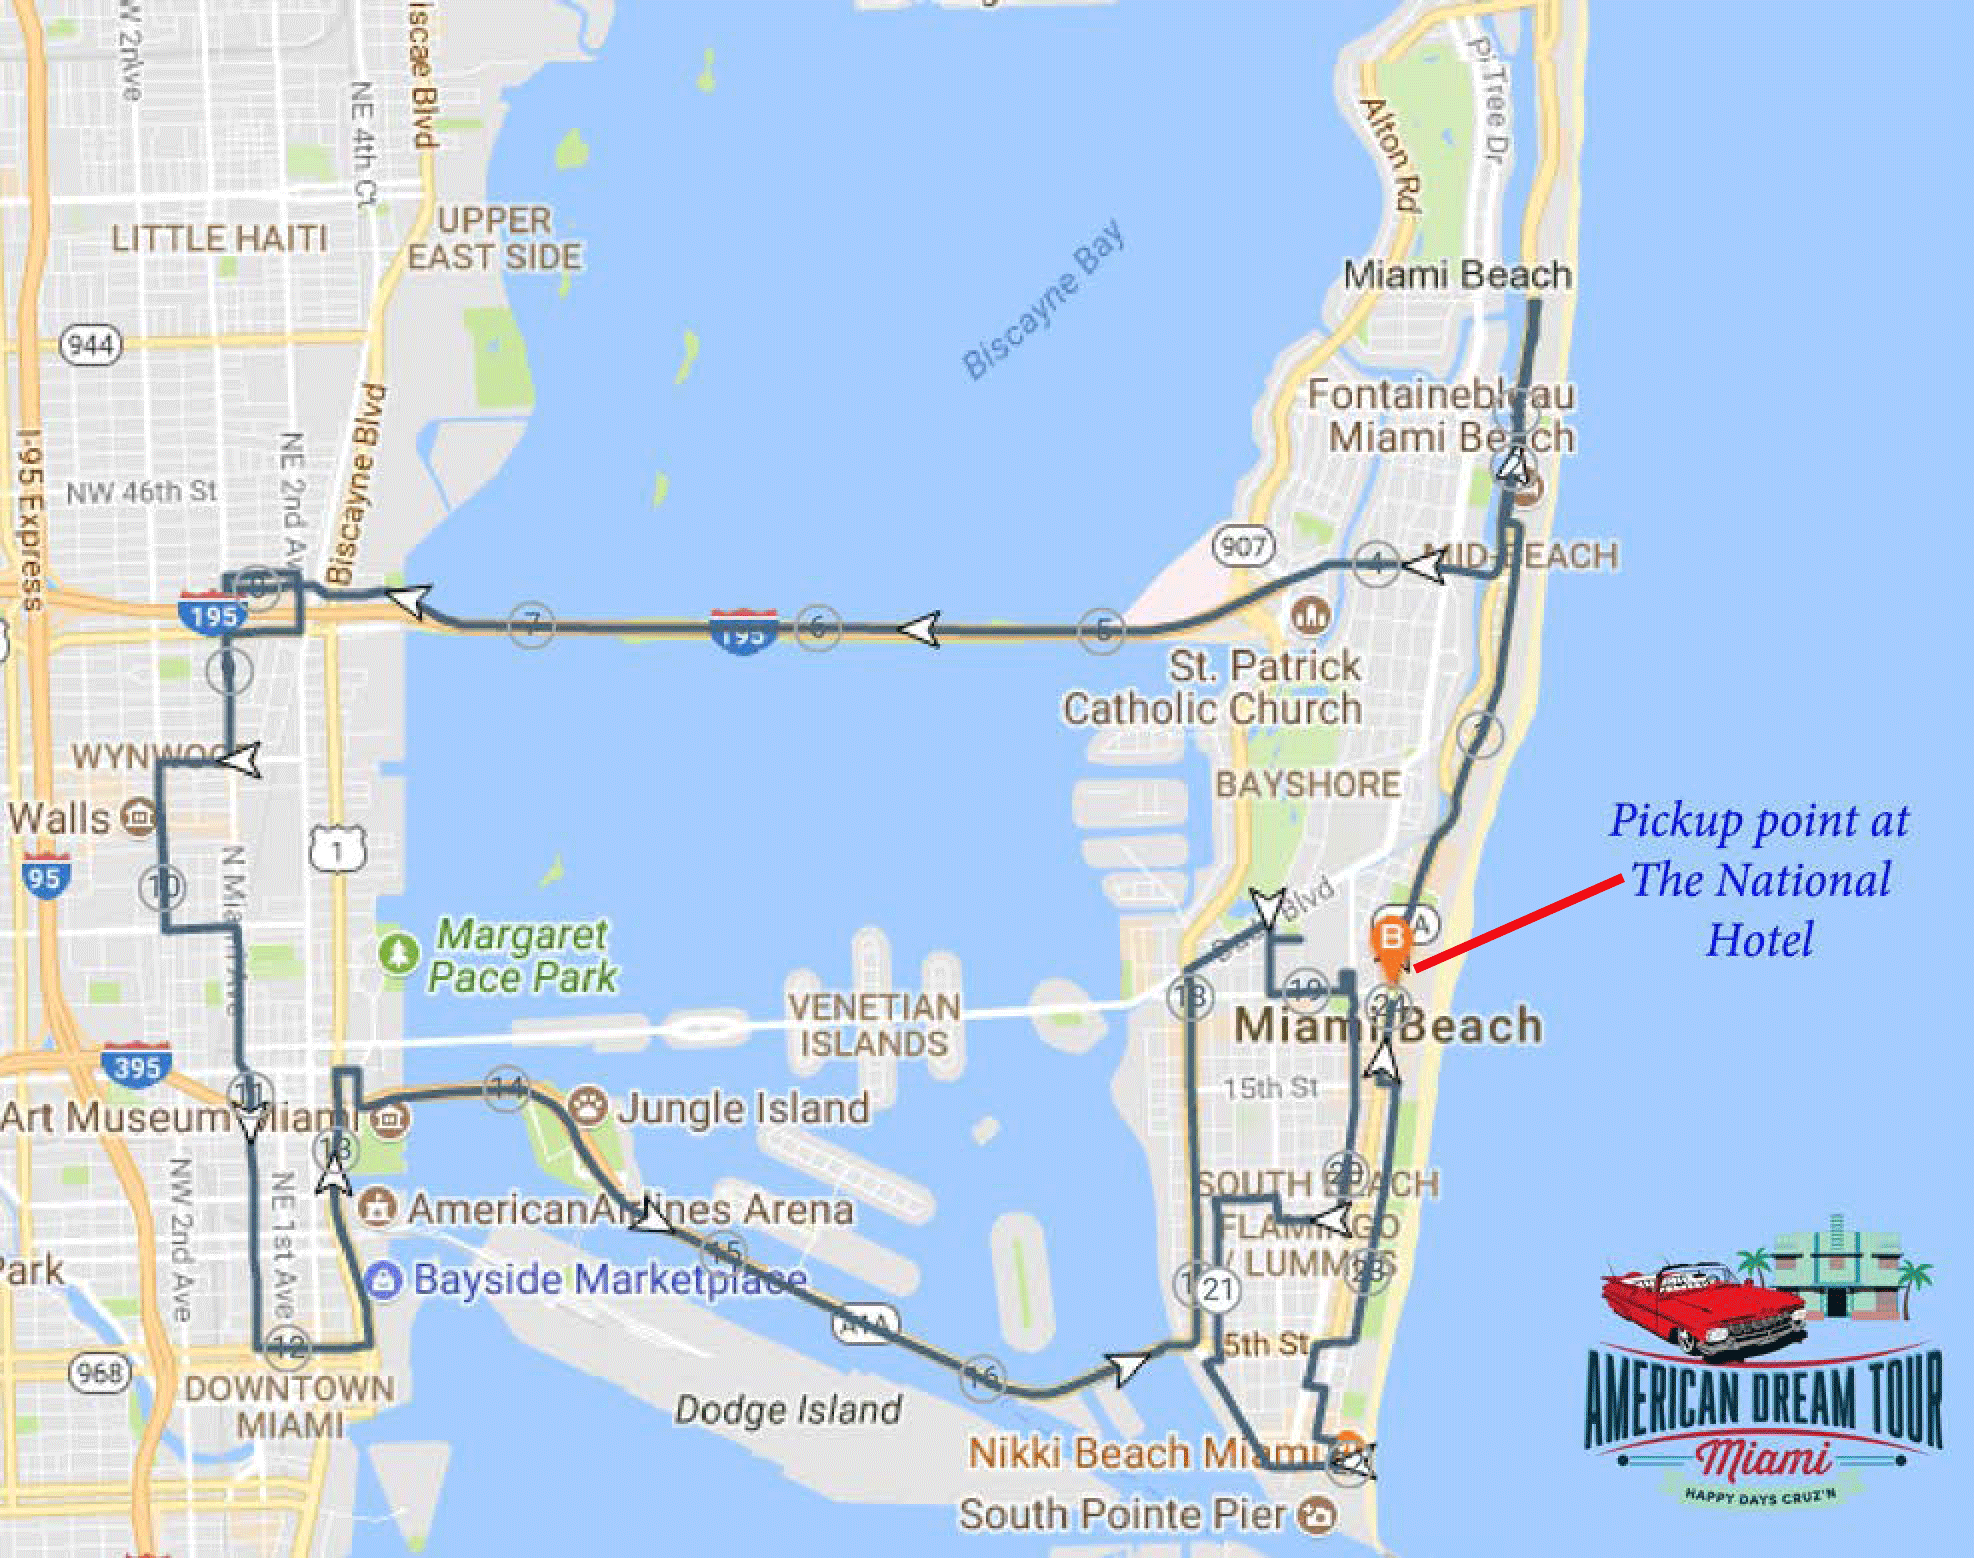 american dream tour miami sight-seeing city tours classic